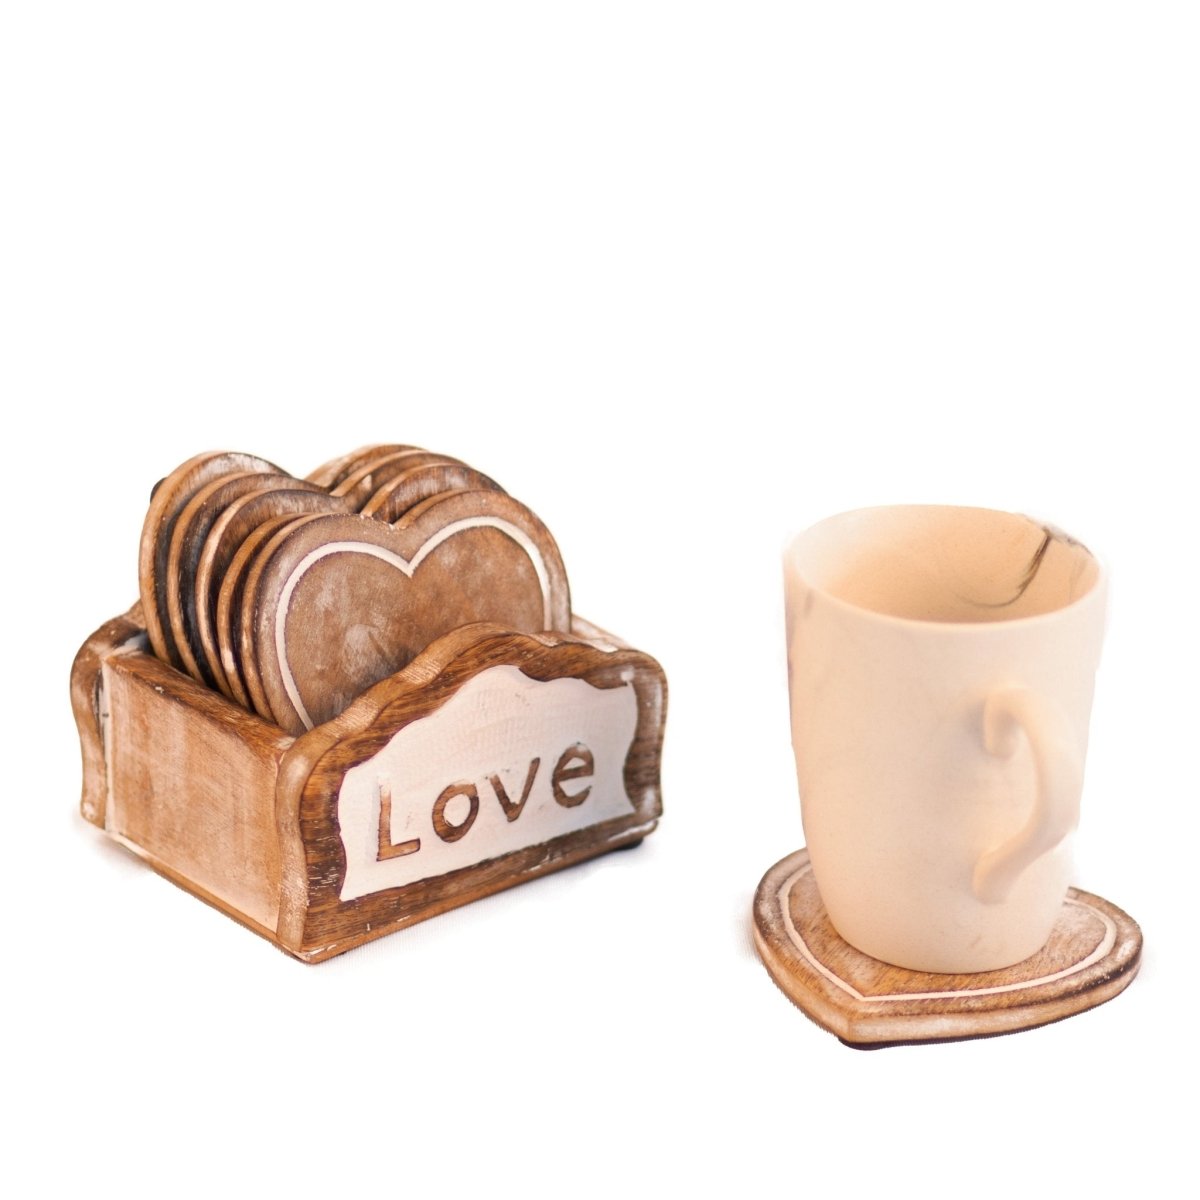 Kezevel Wooden Coasters Mango Wood- Artistically Handcrafted Heart Design - Set of 6 with Holder for Serving - Coaster Plate